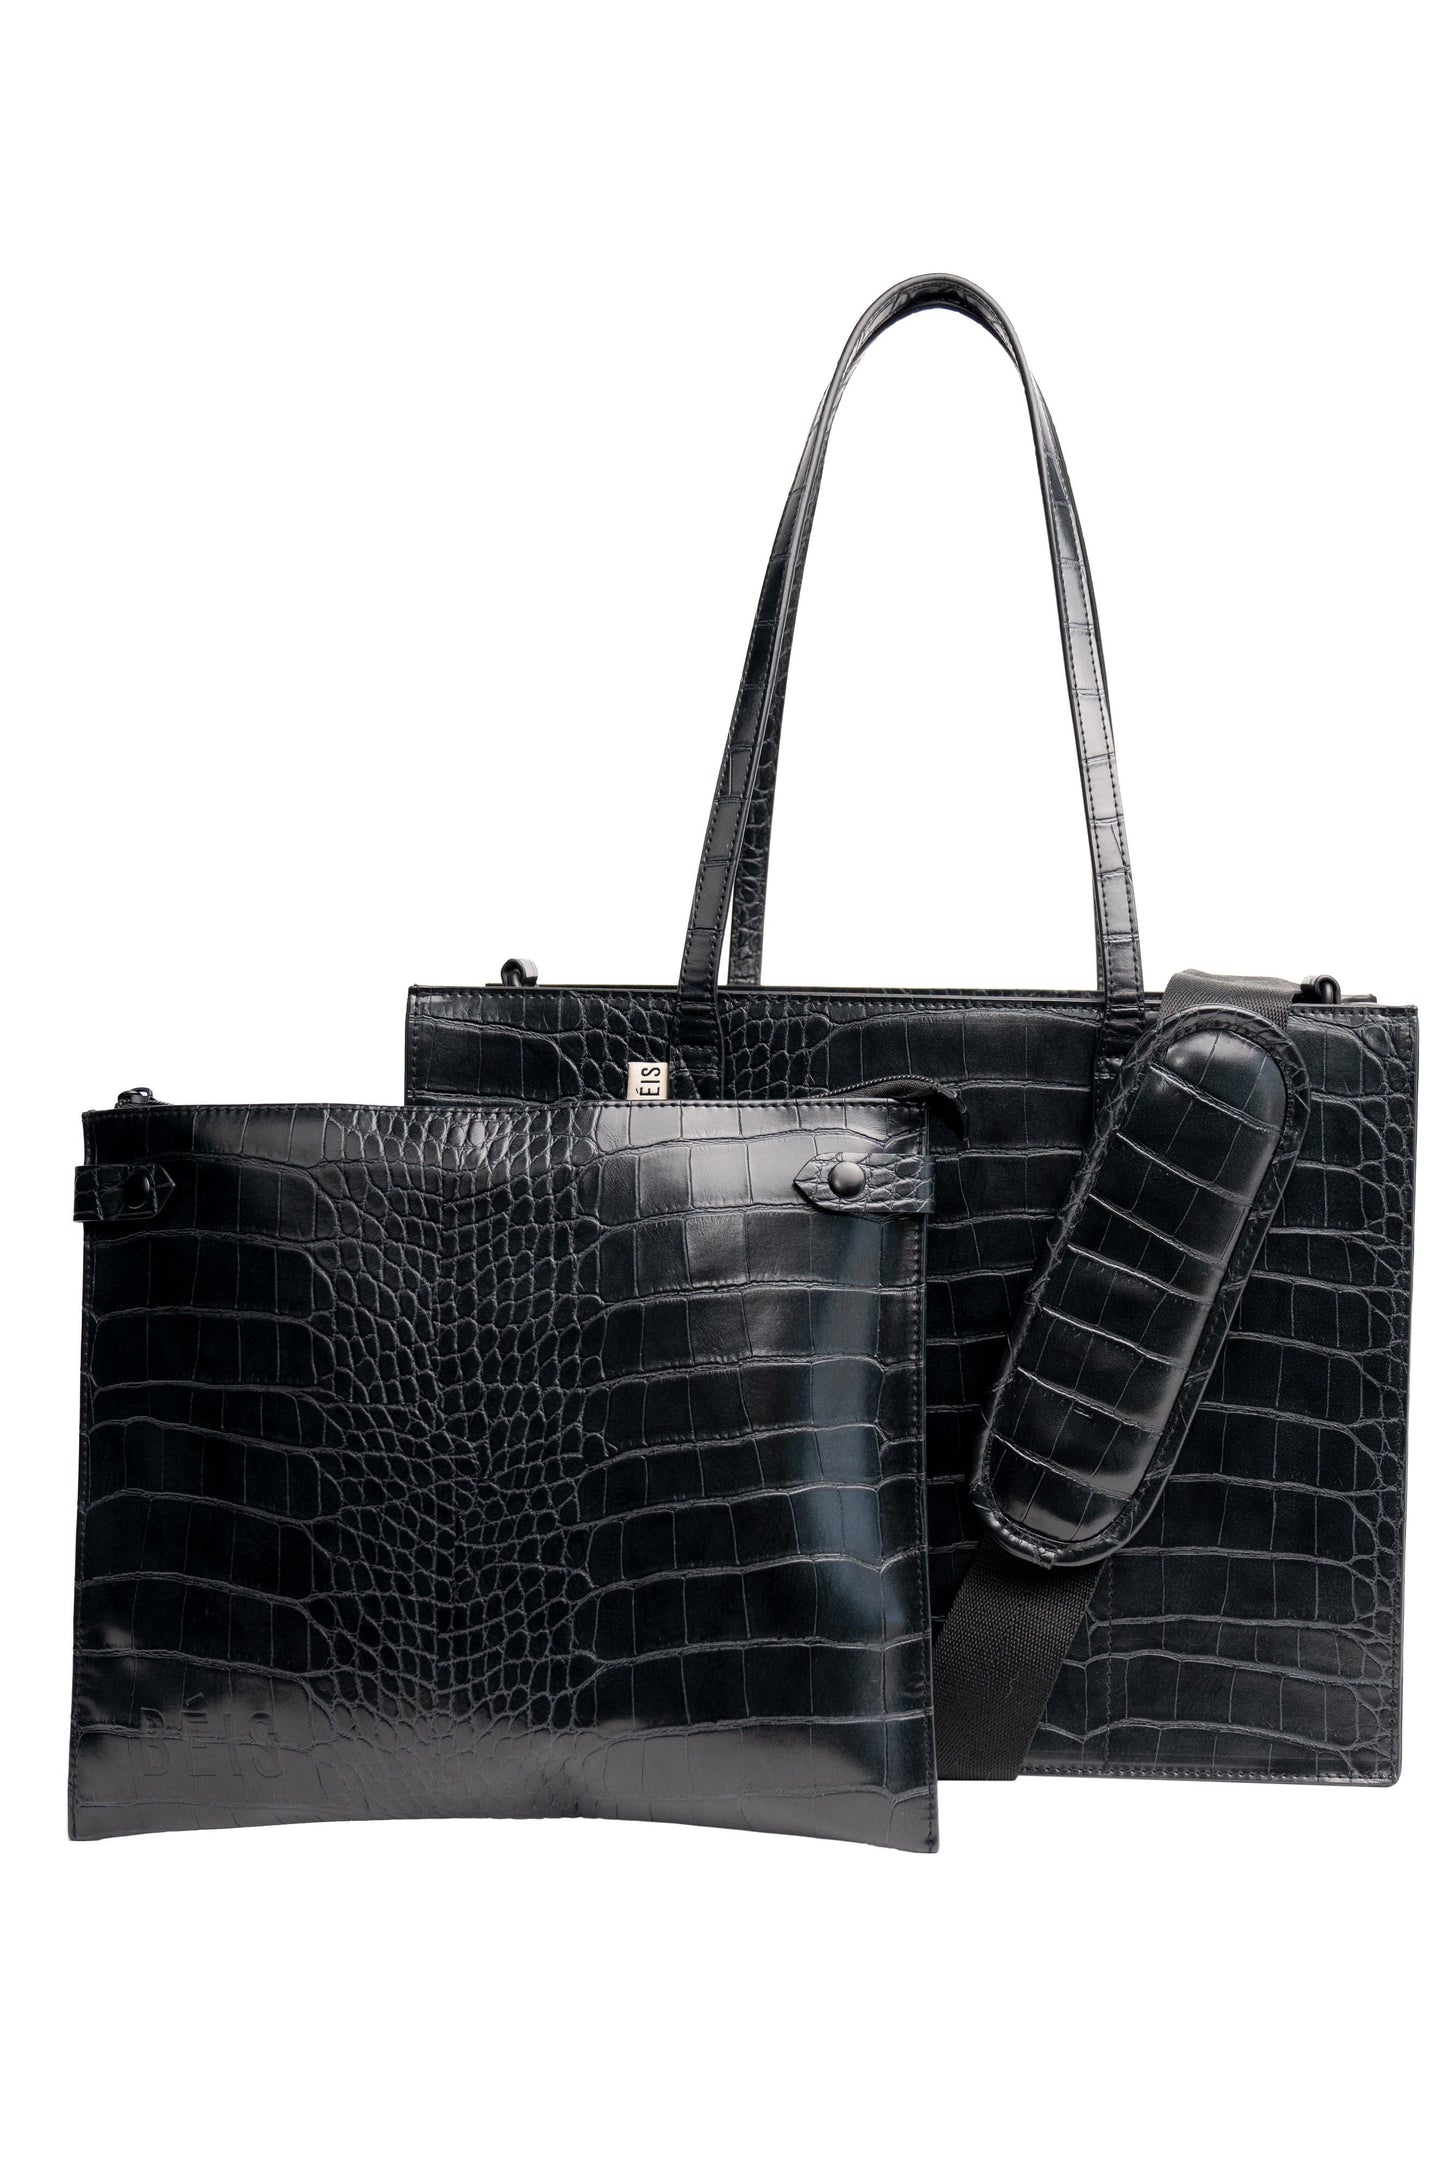 Mini Work Tote in Black Croc Front with Removable Pouch